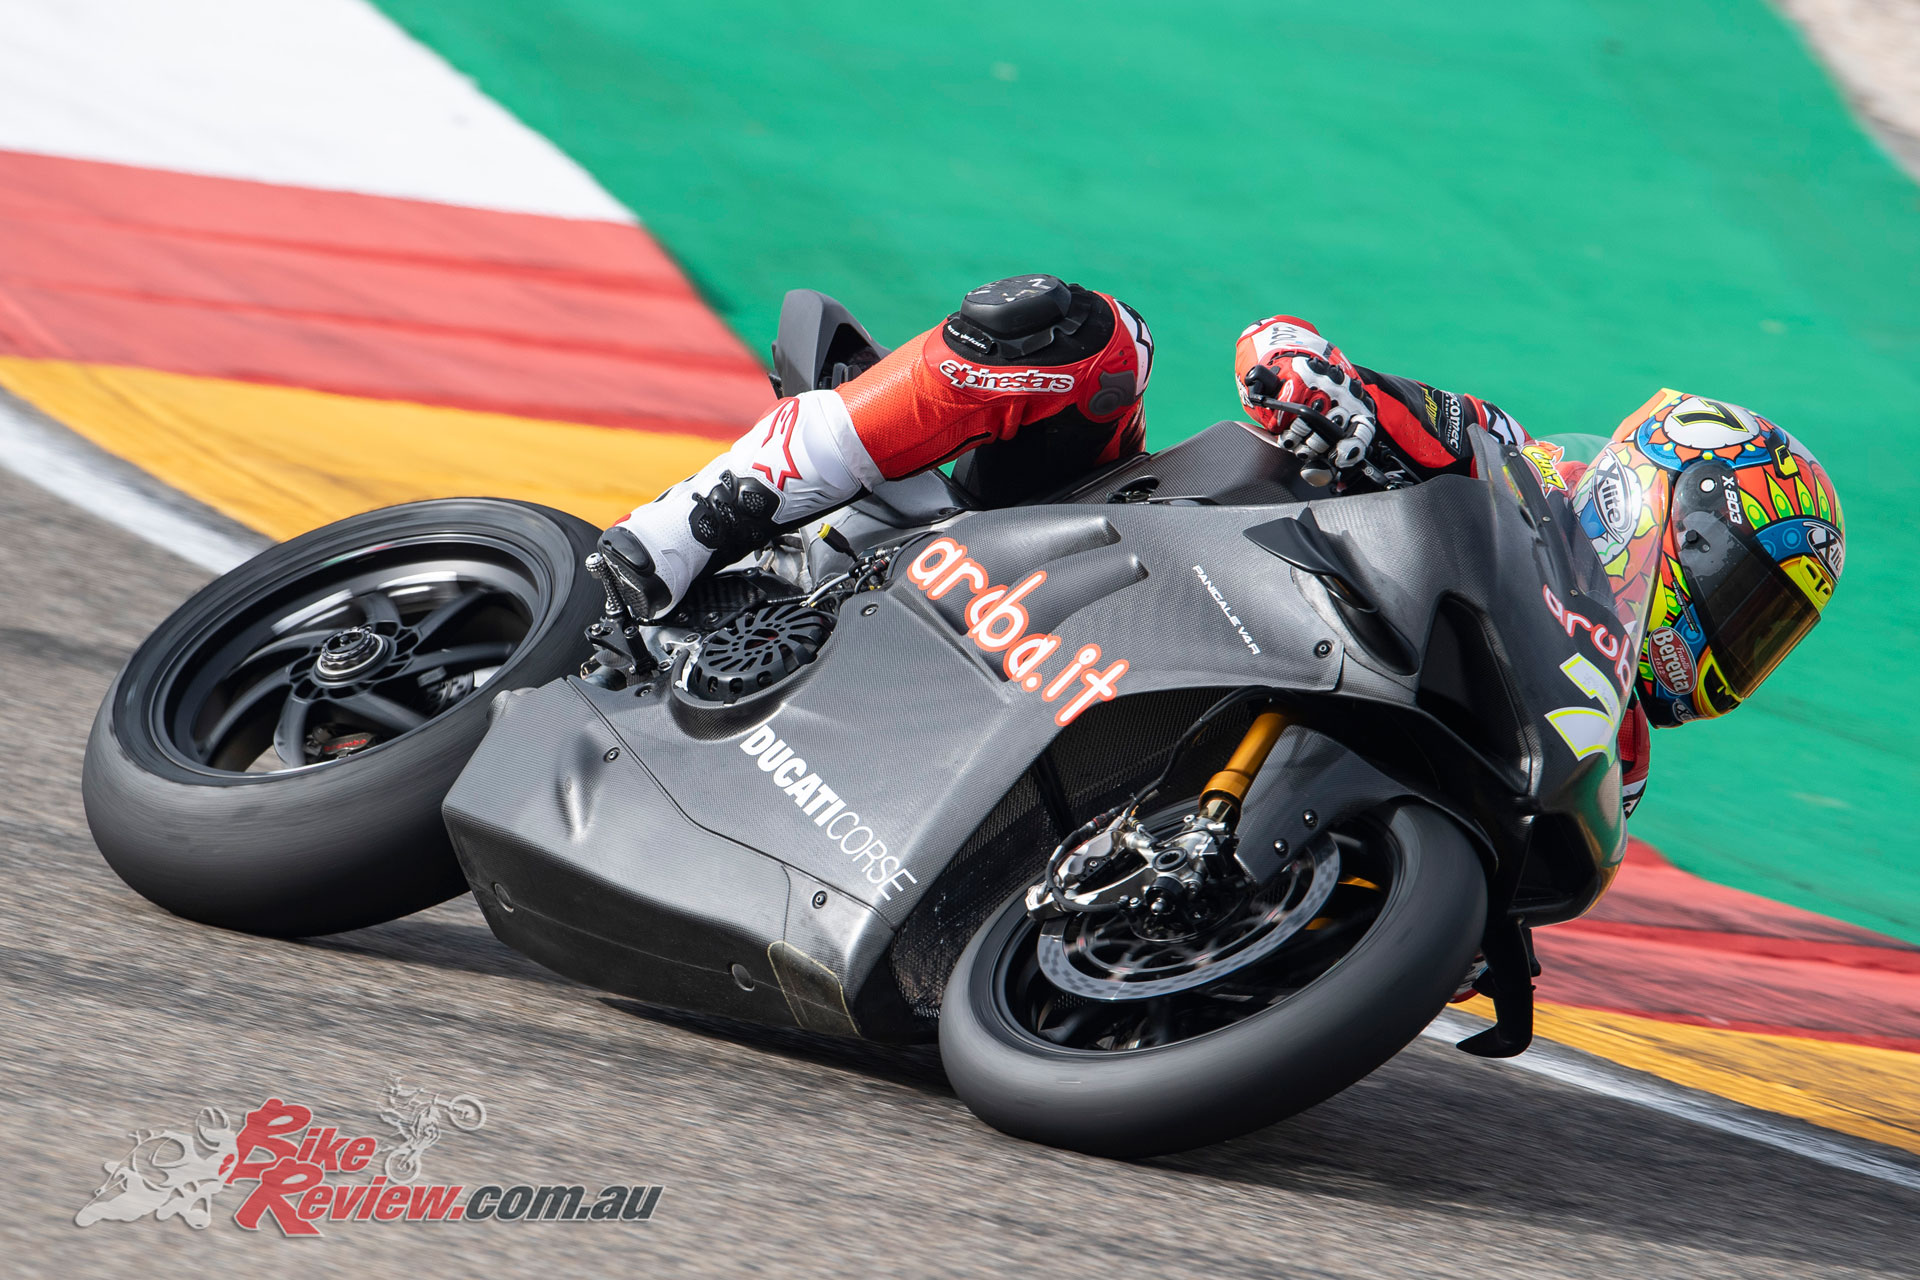 Chaz Davies on the Panigale V4 R - Image by Geebee Images